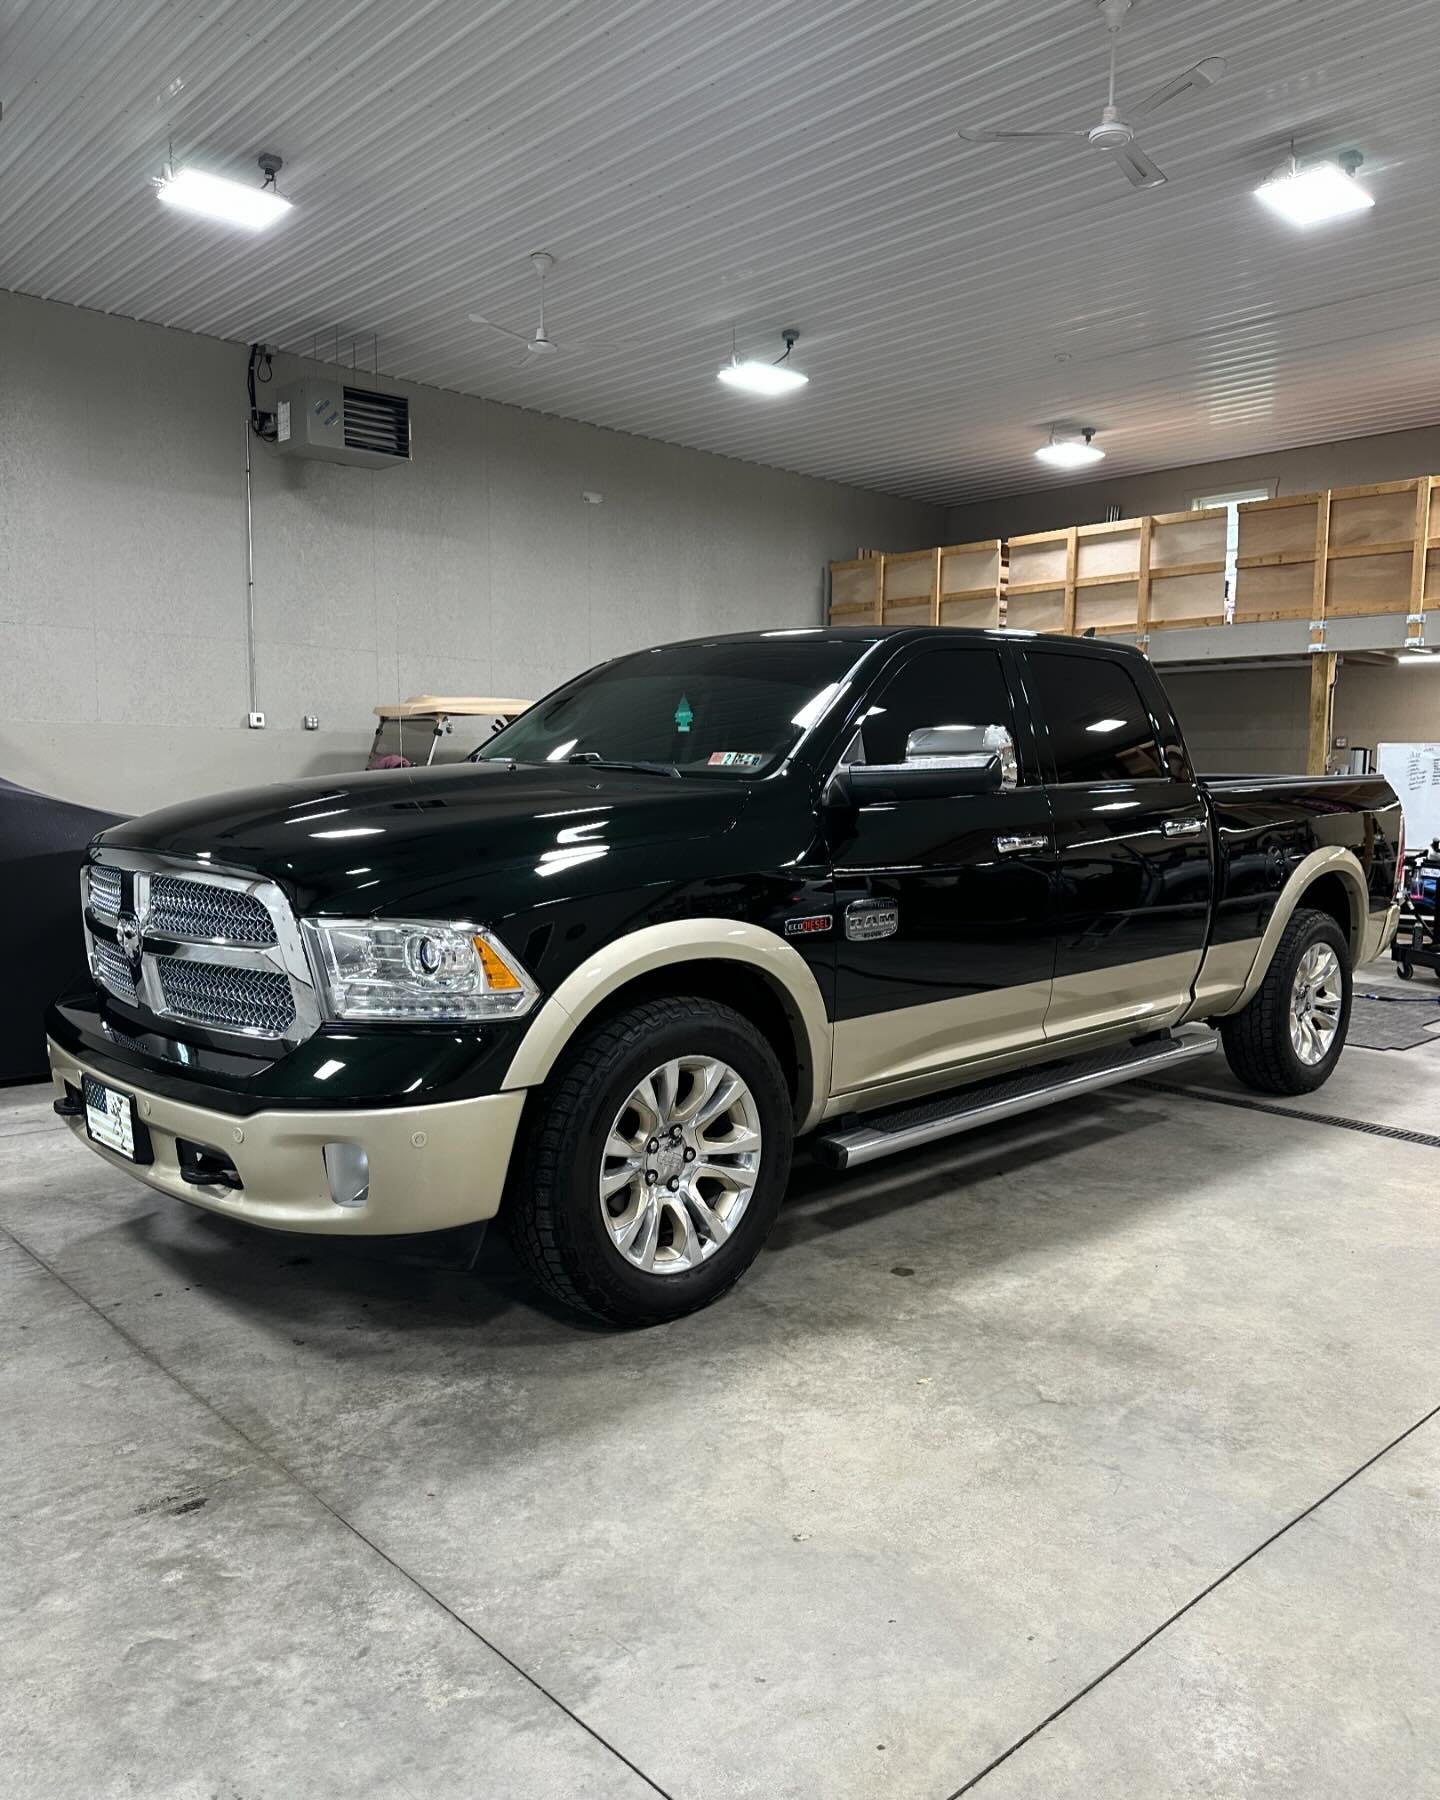 This Ram got a complete overhaul. The interior and exterior were detailed, the bed liner was cleaned and conditioned, and the engine bay was detailed as well.⁣
⁣
The paint received a 2-step correction to remove swirl marks and light scratches, it was